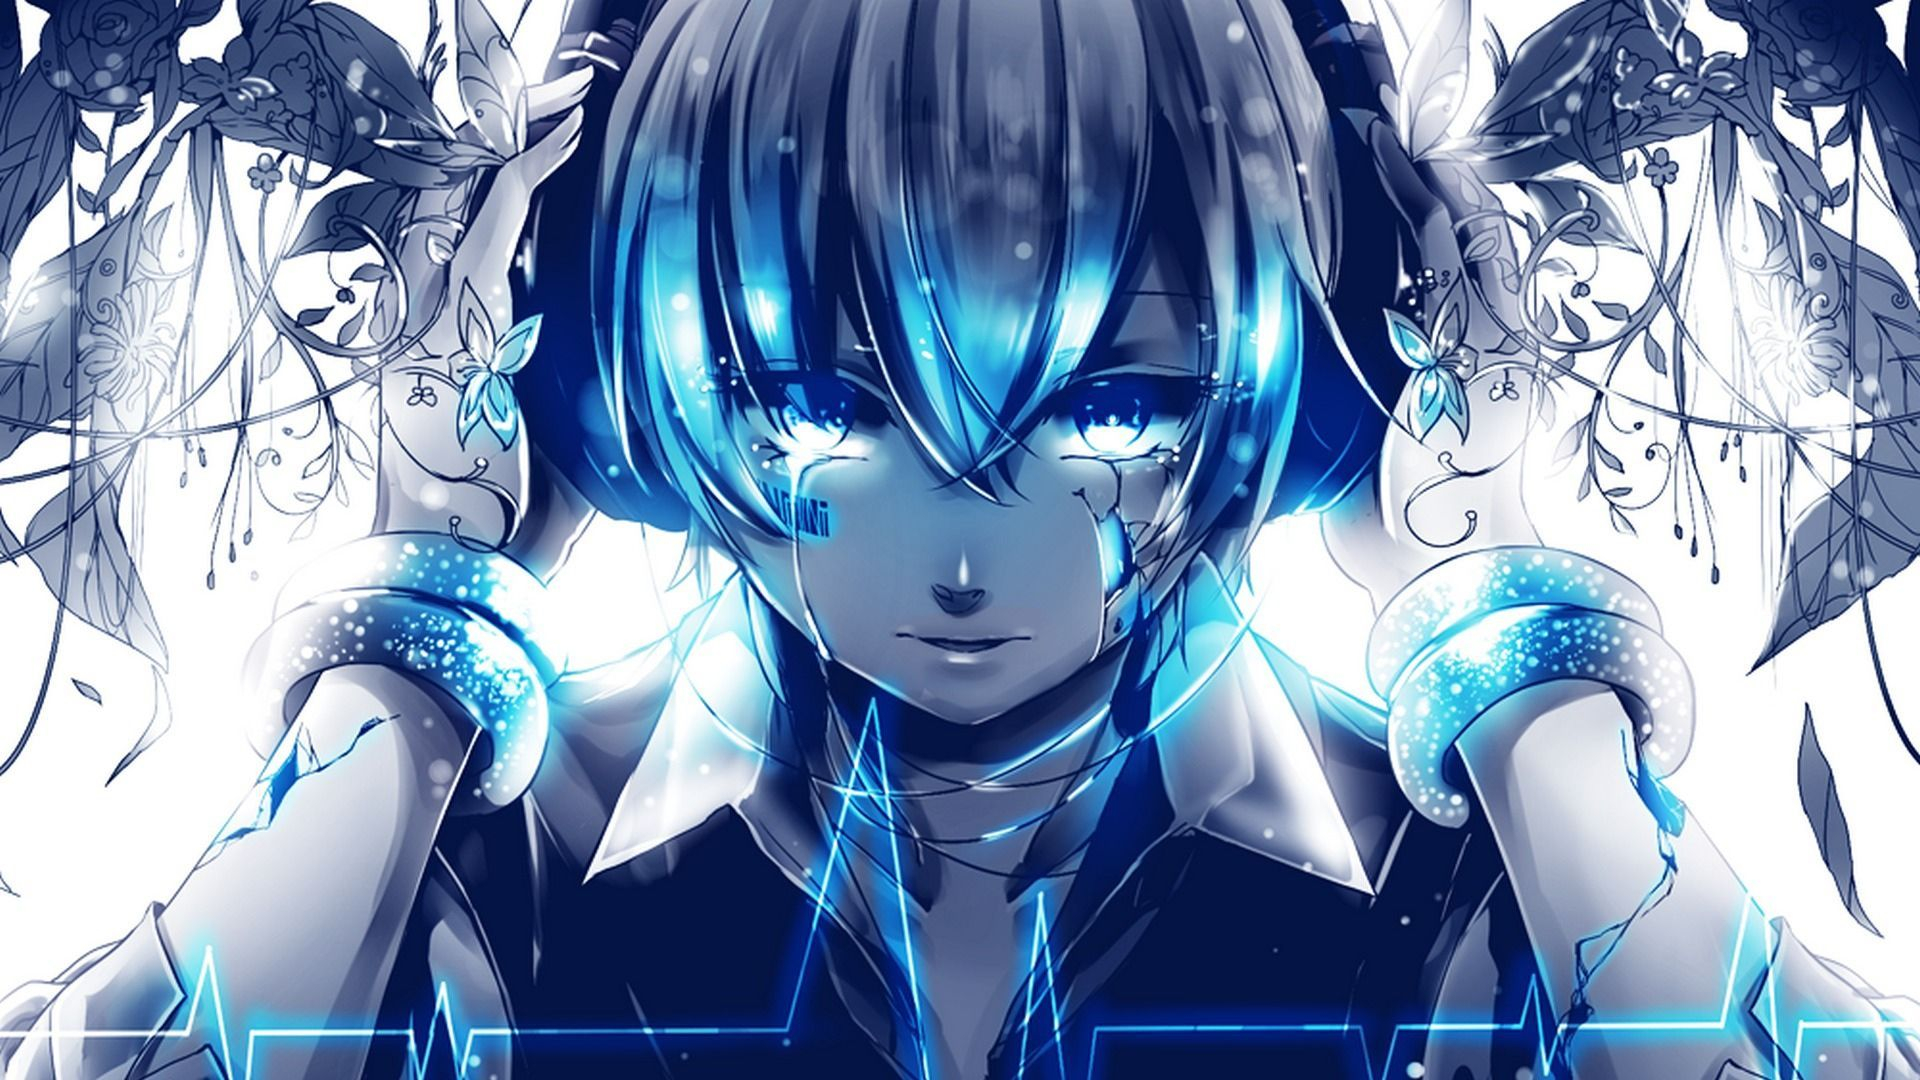 1920x1080 Vocaloid Wallpapers Top Free Vocaloid Backgrounds